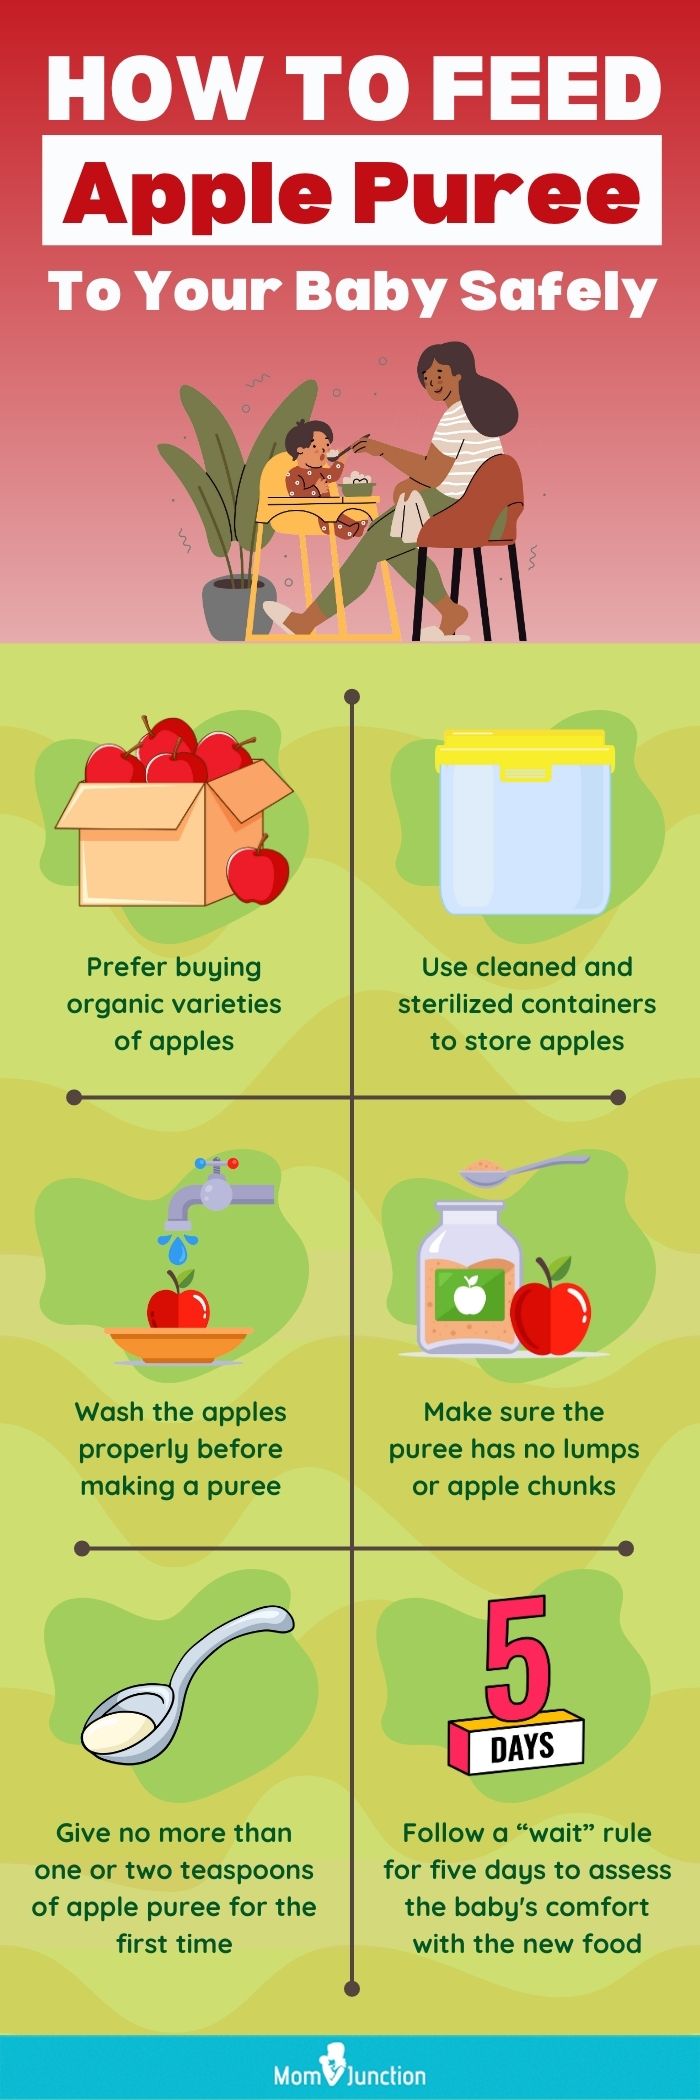 how to feed apple puree to your baby safely (infographic)